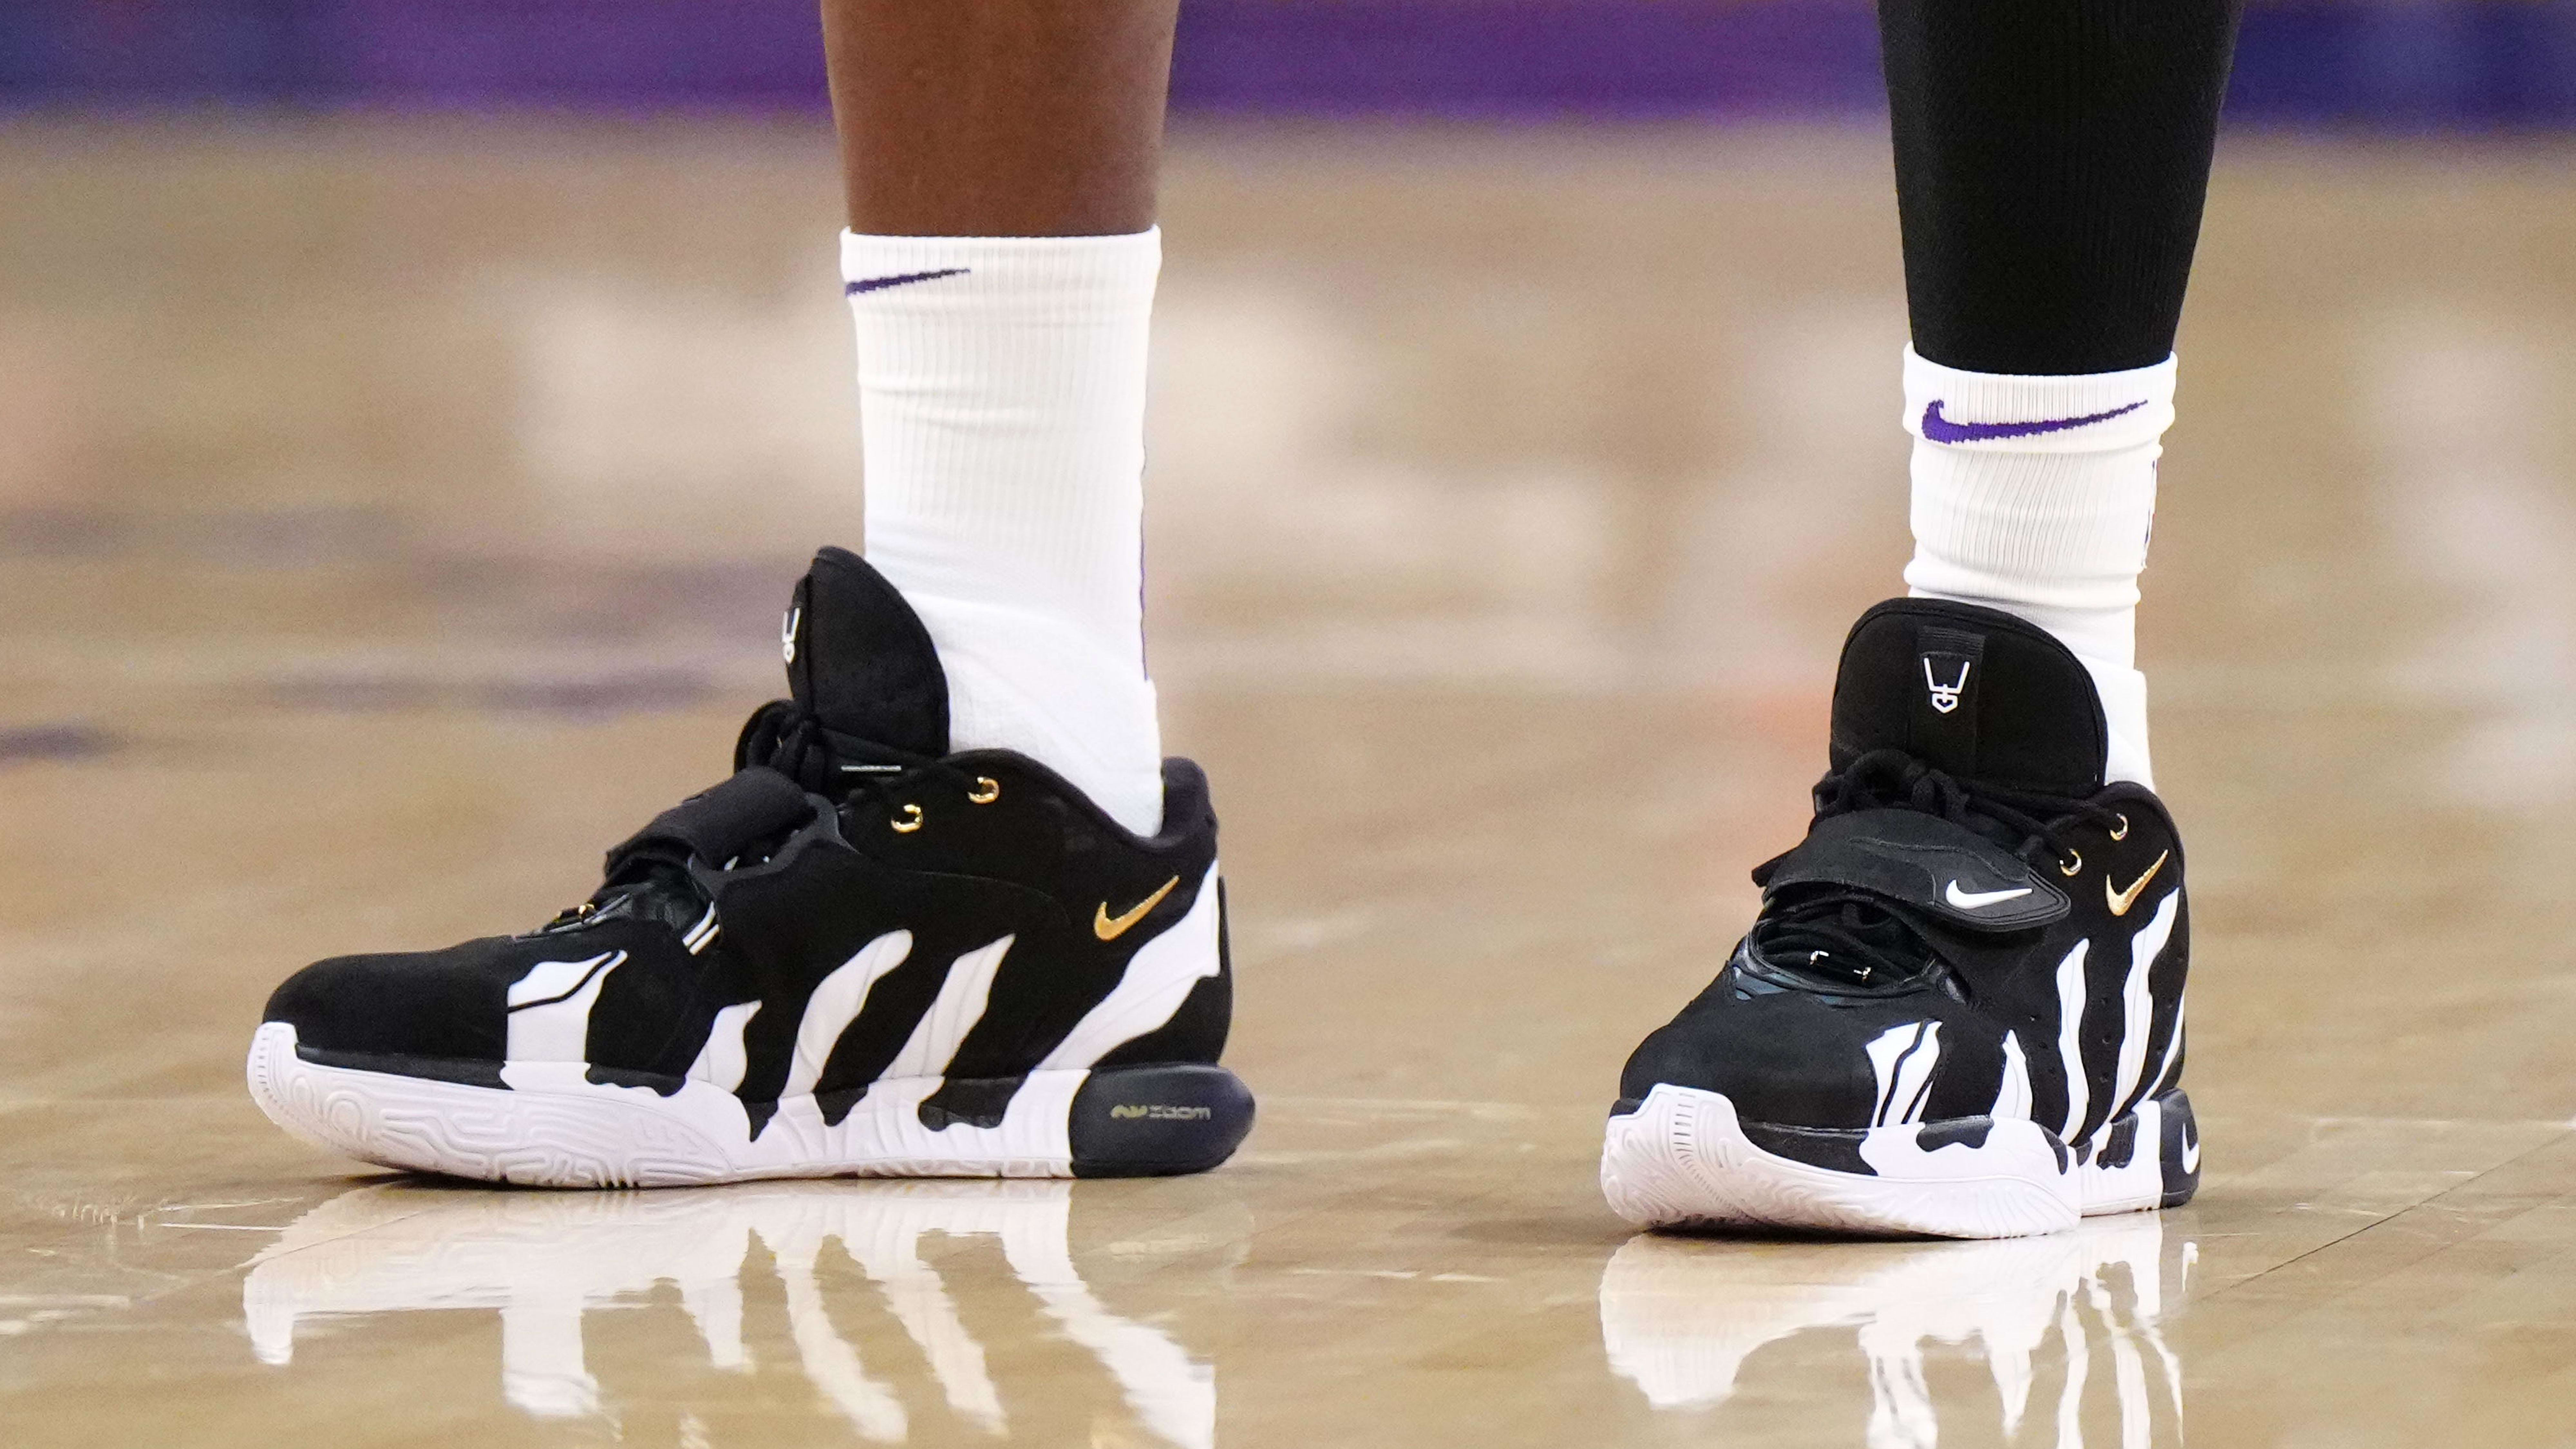 Los Angeles Lakers forward LeBron James' black and white Nike sneakers.